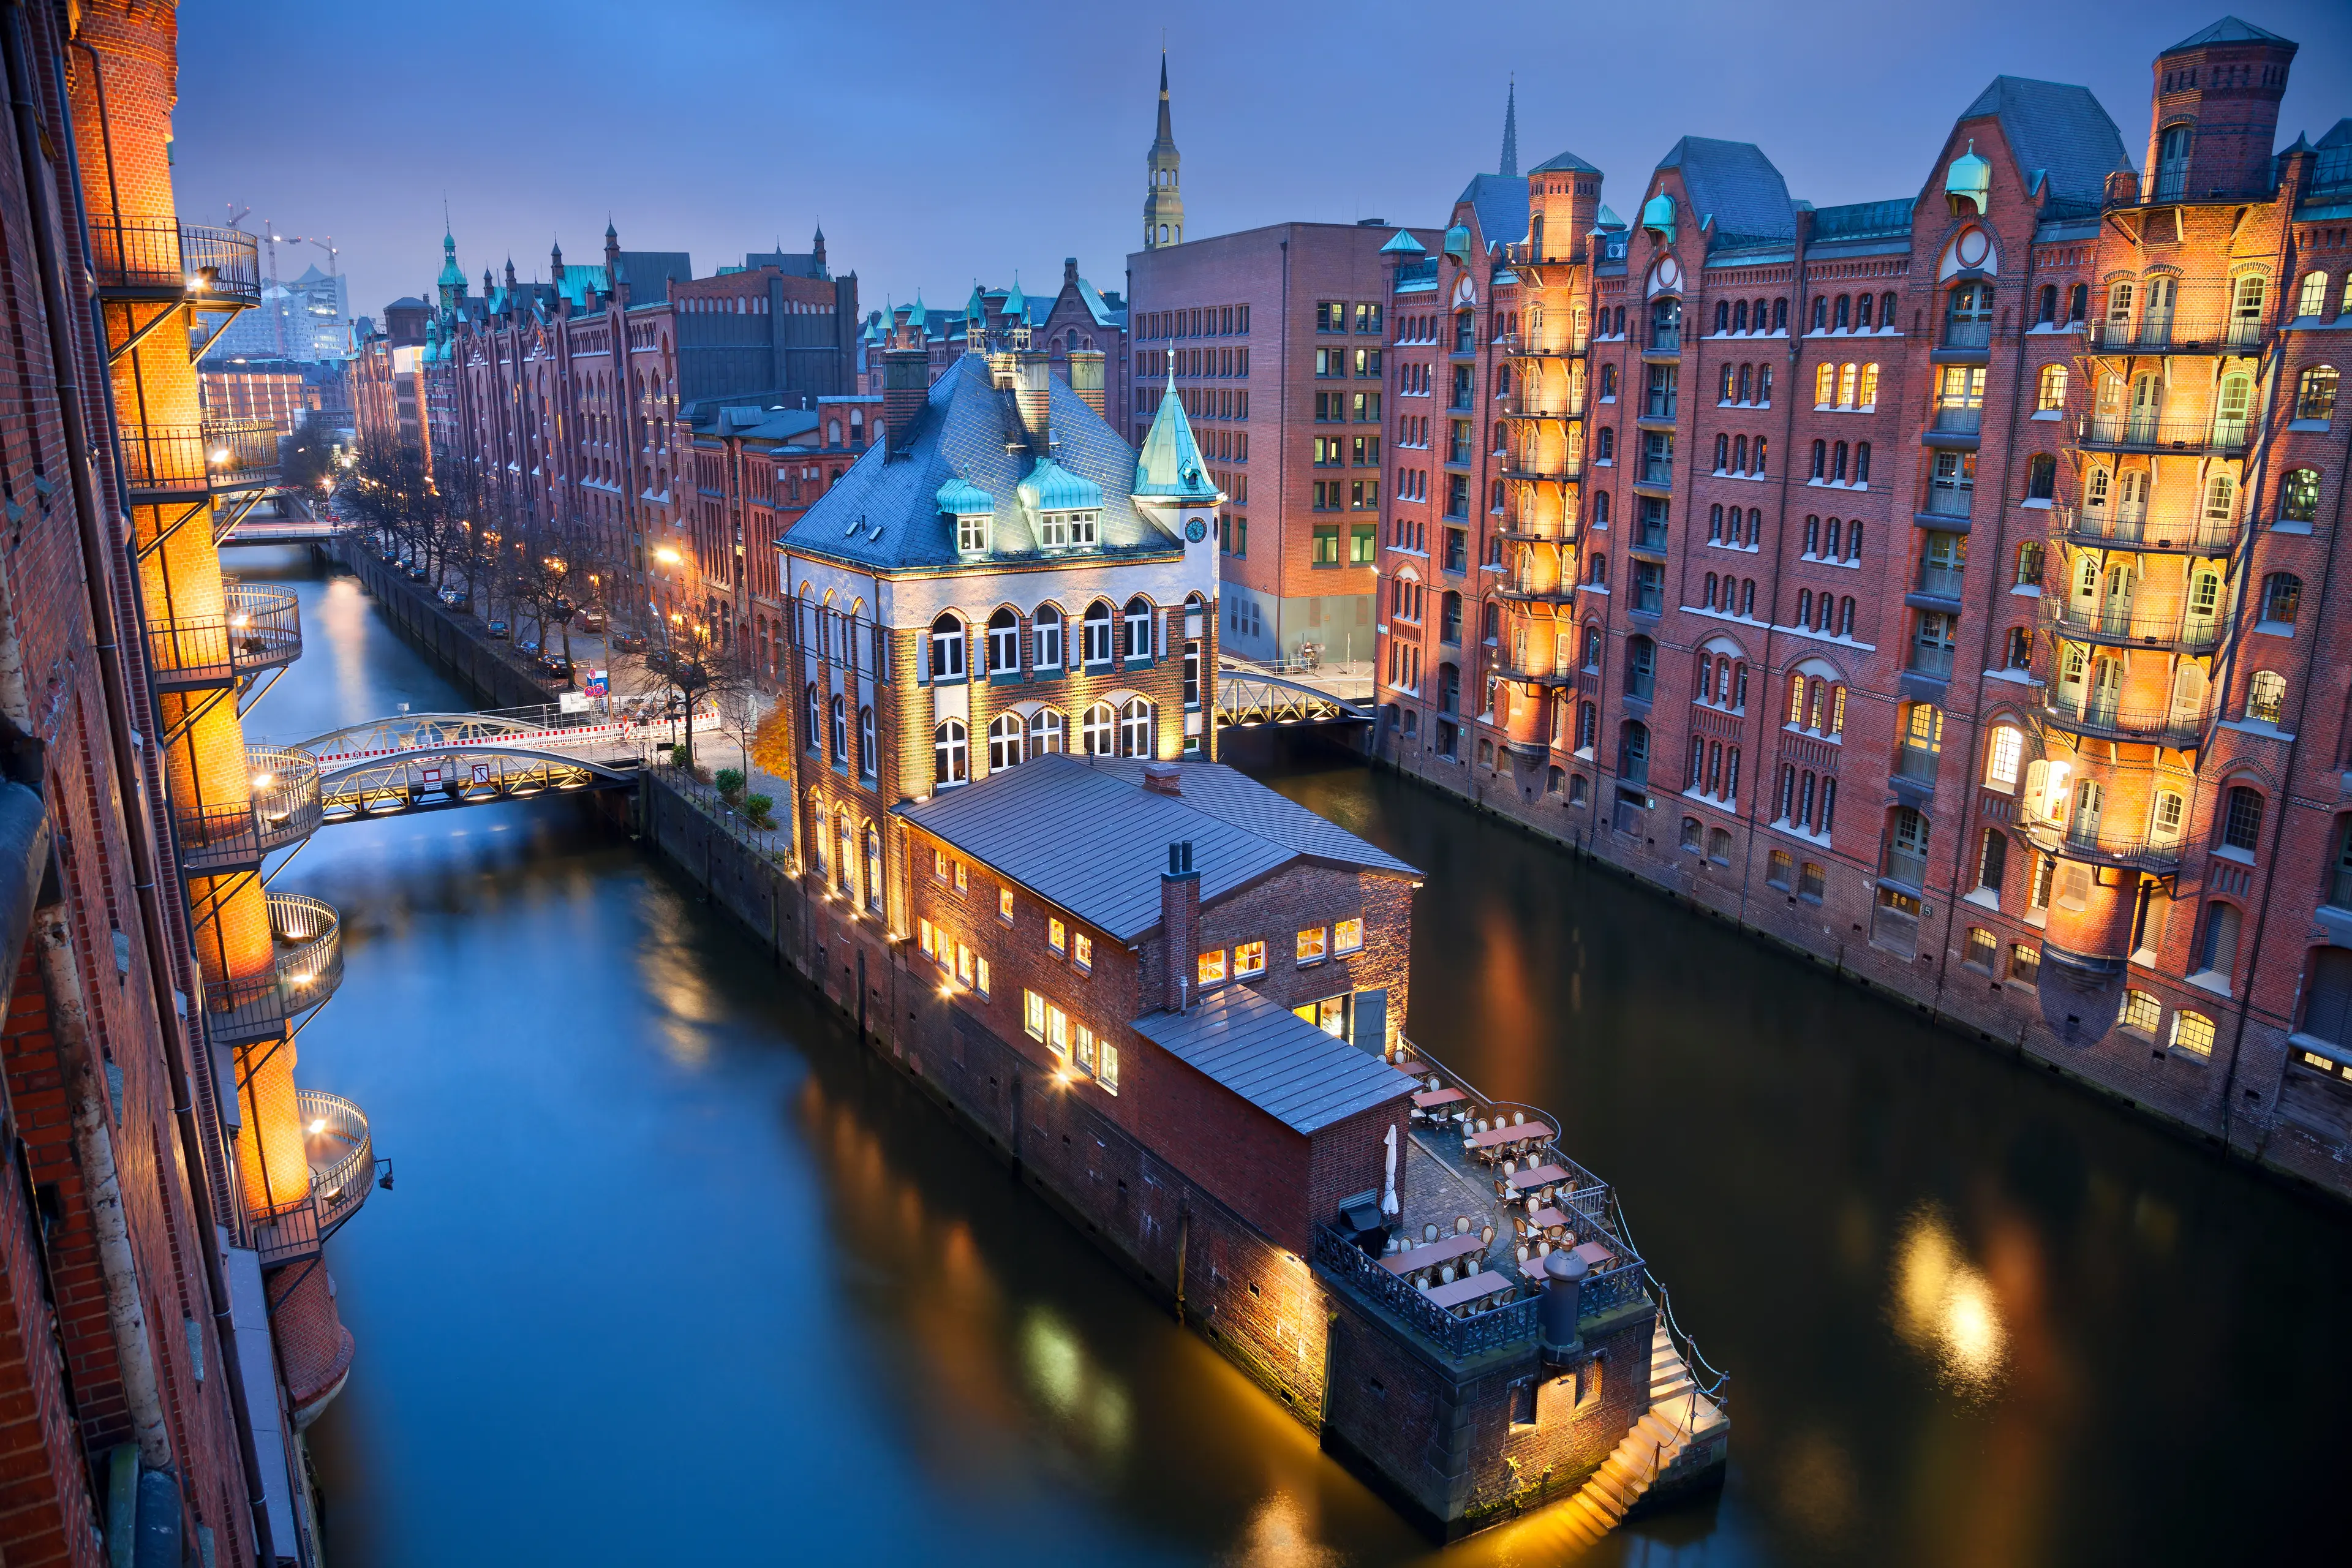 1-Day Local's Guide: Nightlife and Shopping in Hamburg with Friends